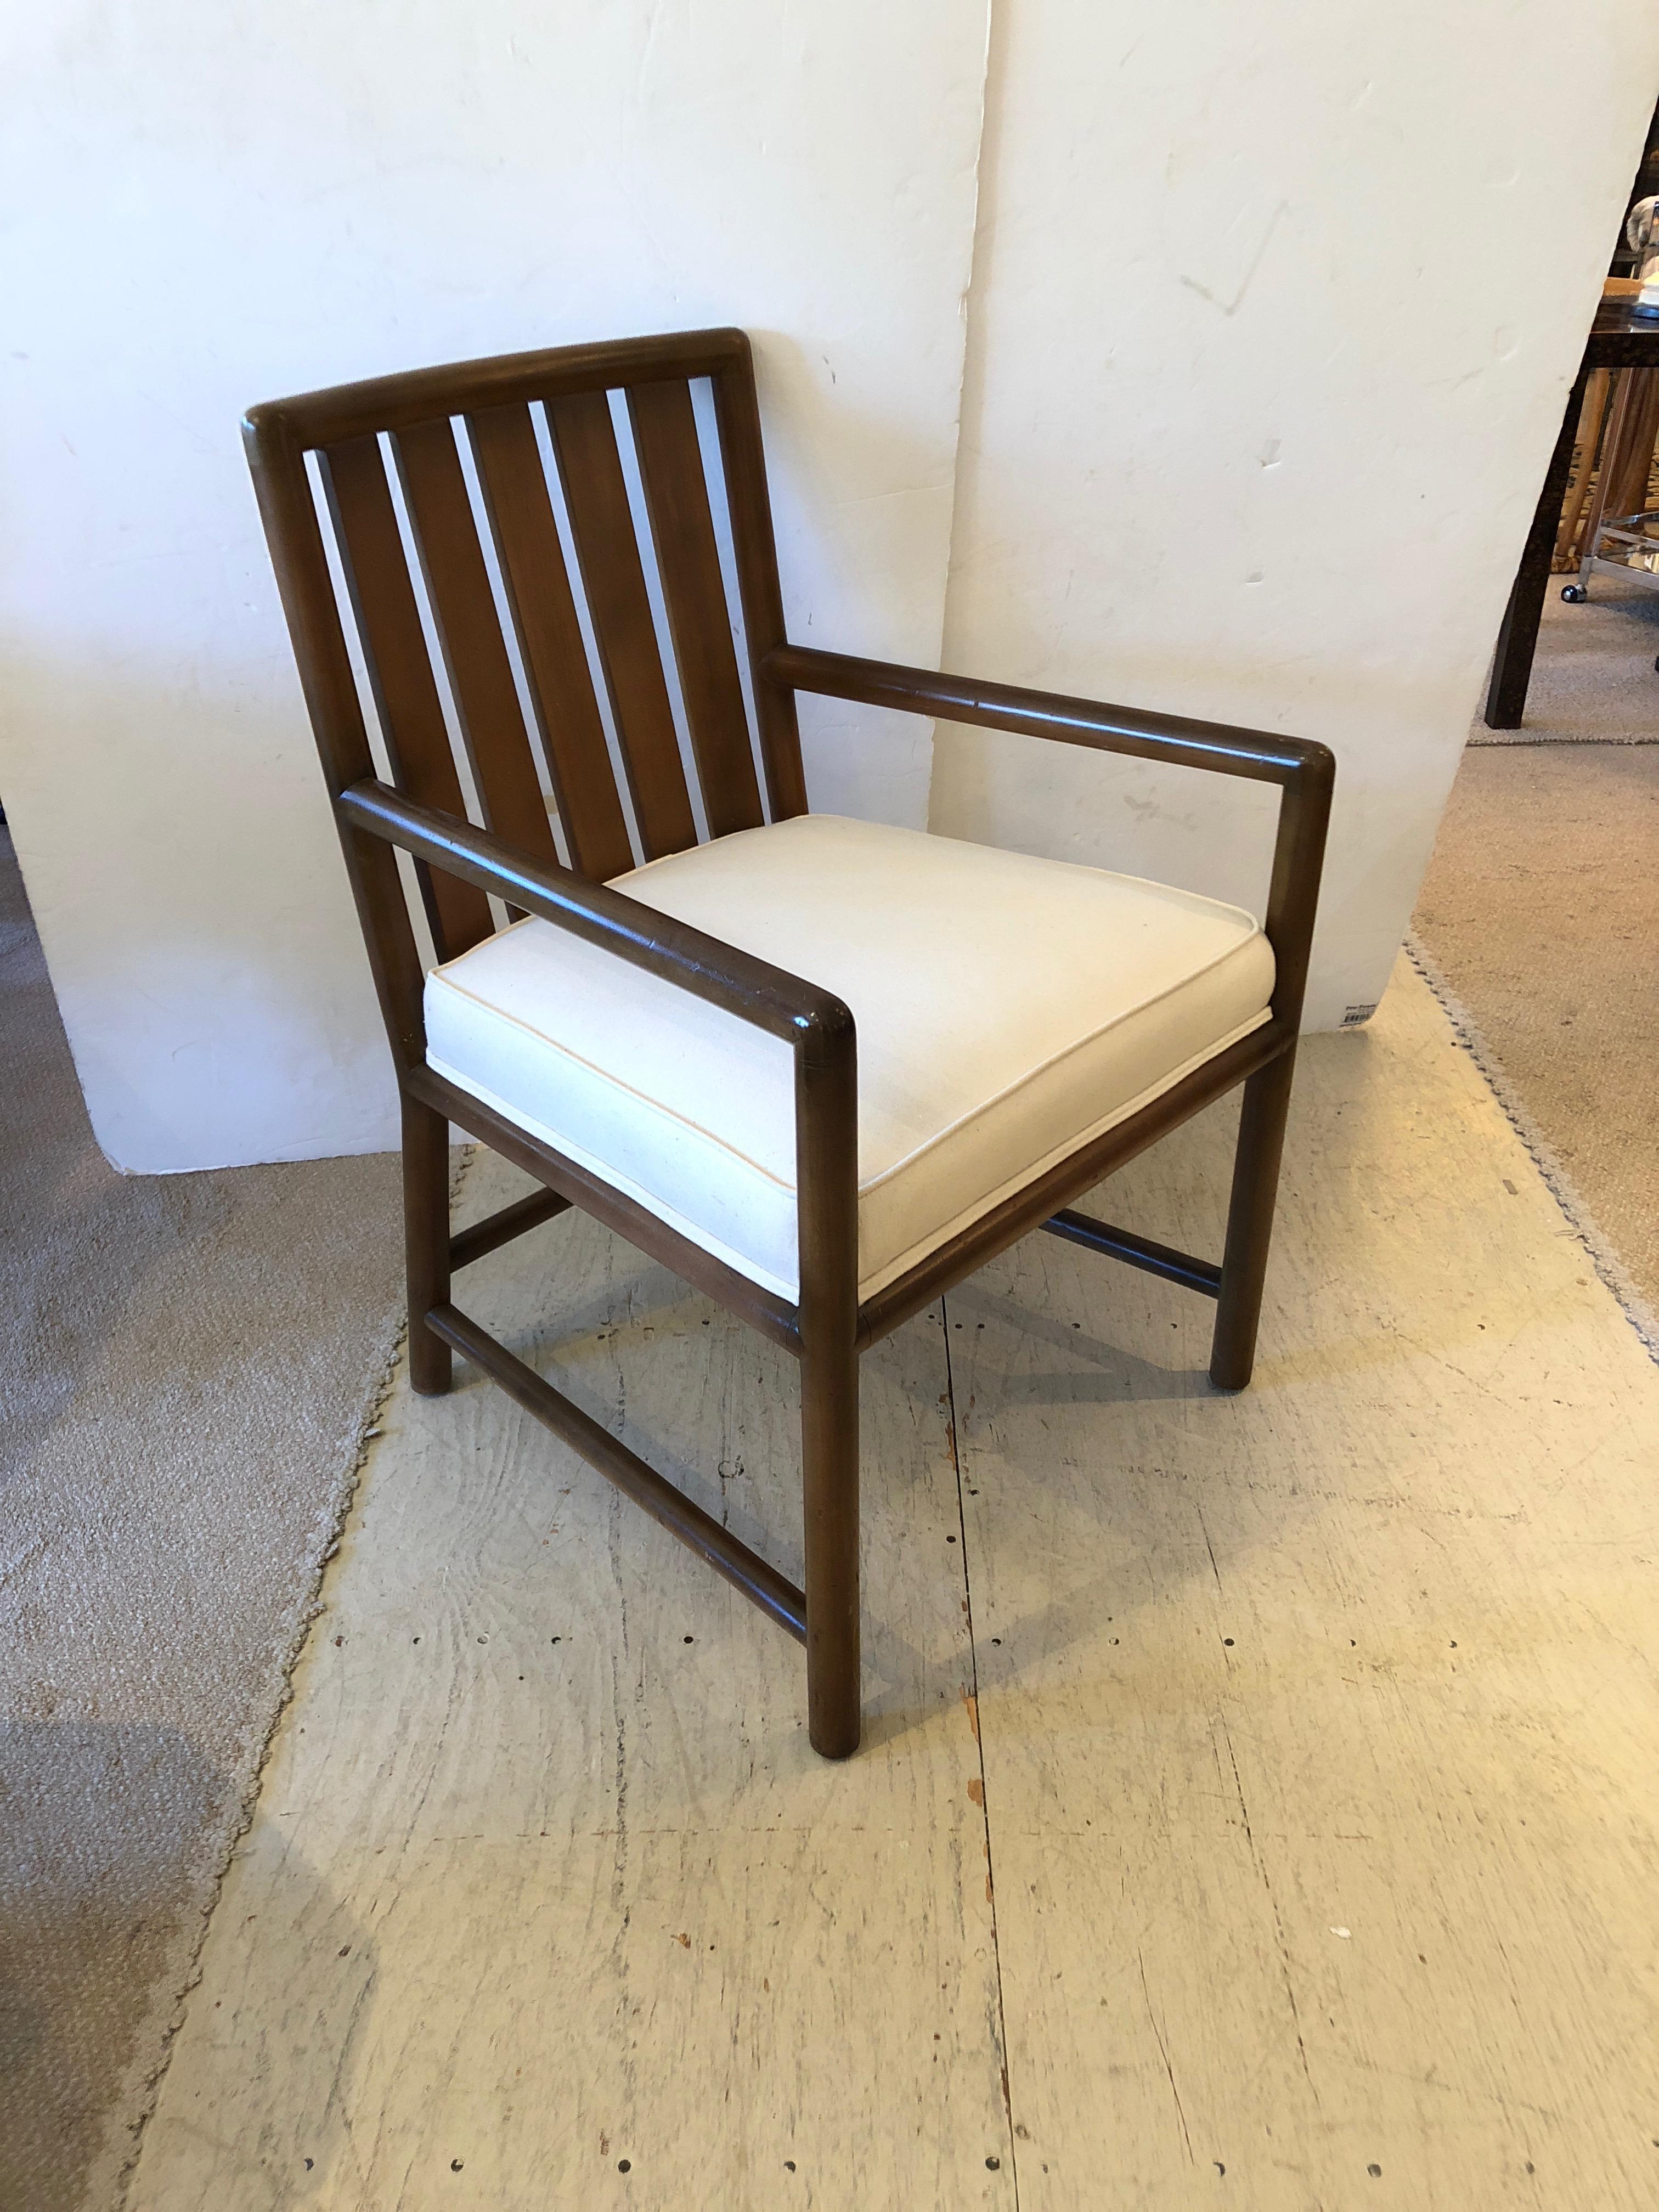 Masculine and sleek walnut Mid-Century Modern armchair by Robsjohn Gibbings with new white duck upholstered seat.